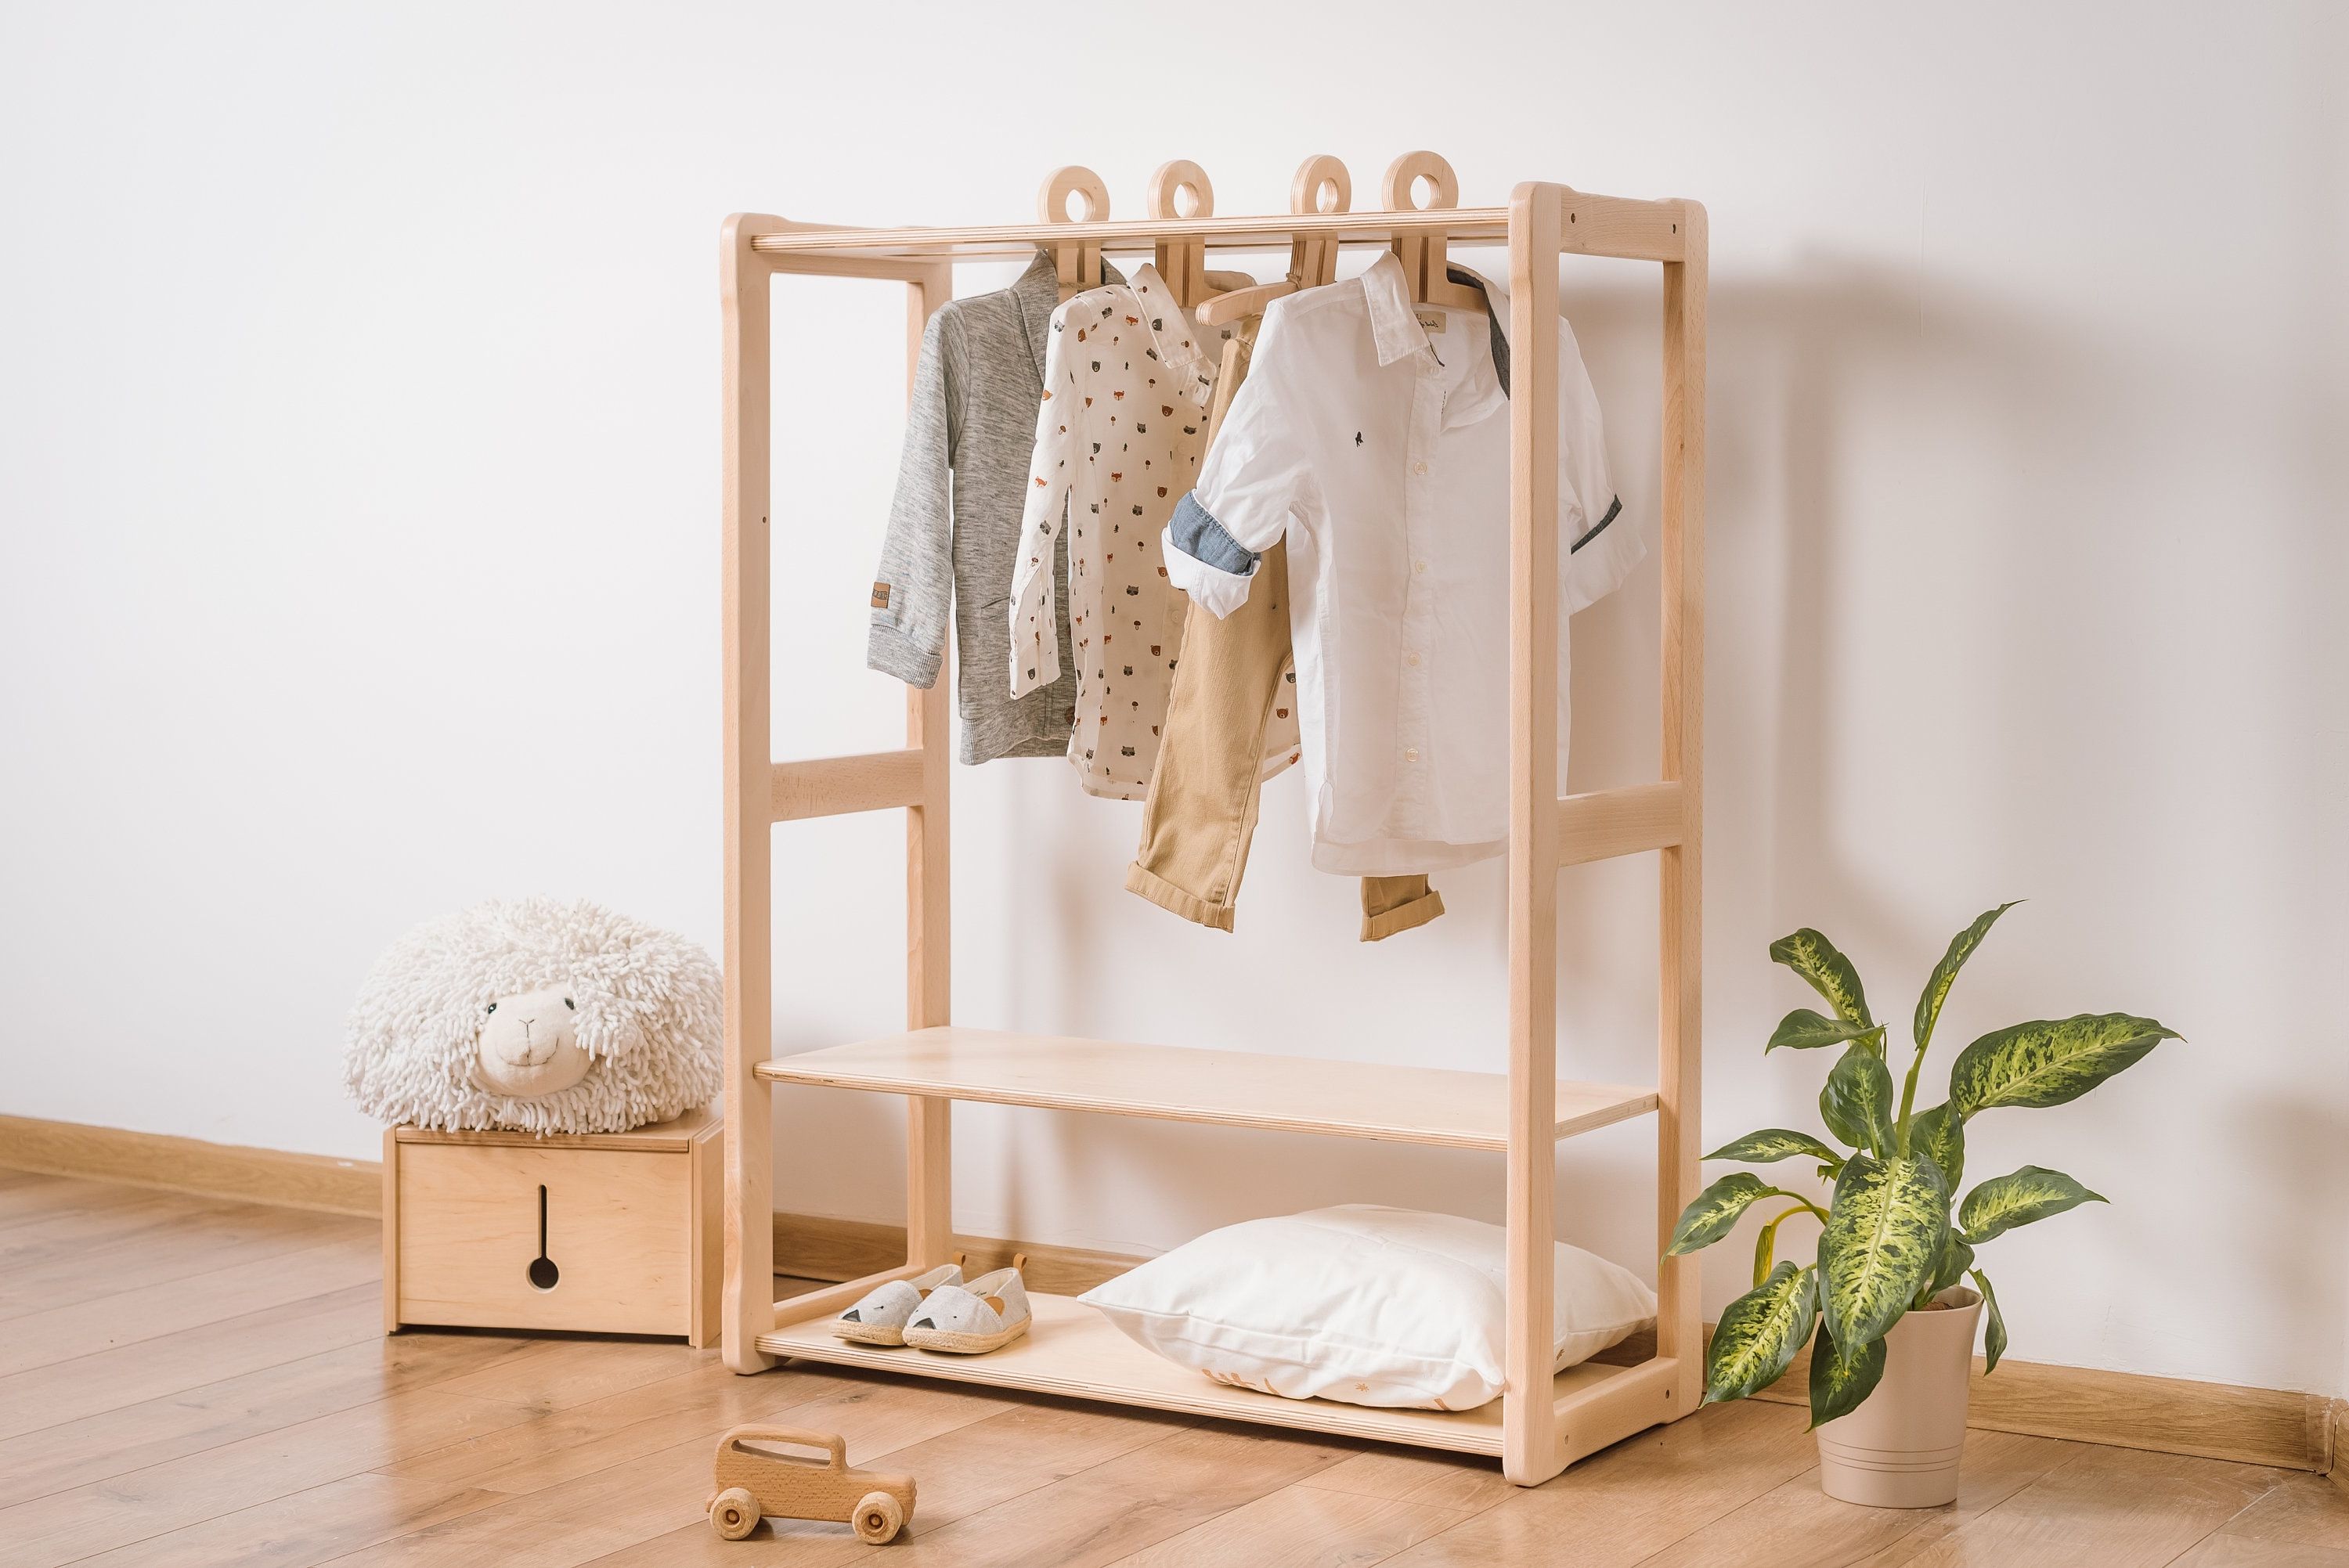 Kids Clothing Rack Type A With Shelf Wood Clothes Rack – Etsy Pertaining To Double Rail Childrens Wardrobes (View 8 of 20)